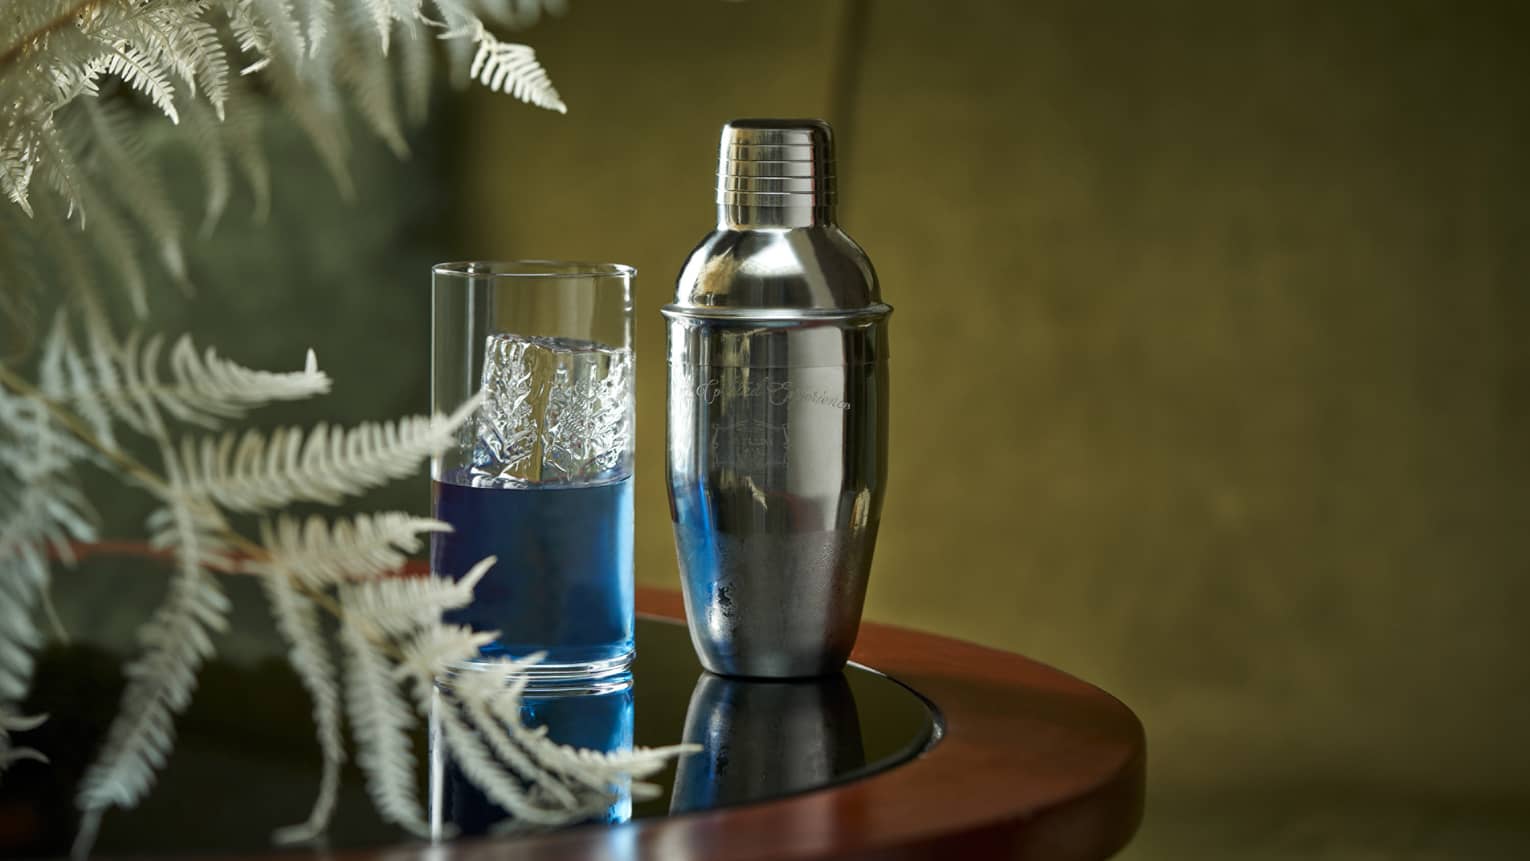 Blue cocktail in crystal highball glass beside chrome cocktail shaker and fern